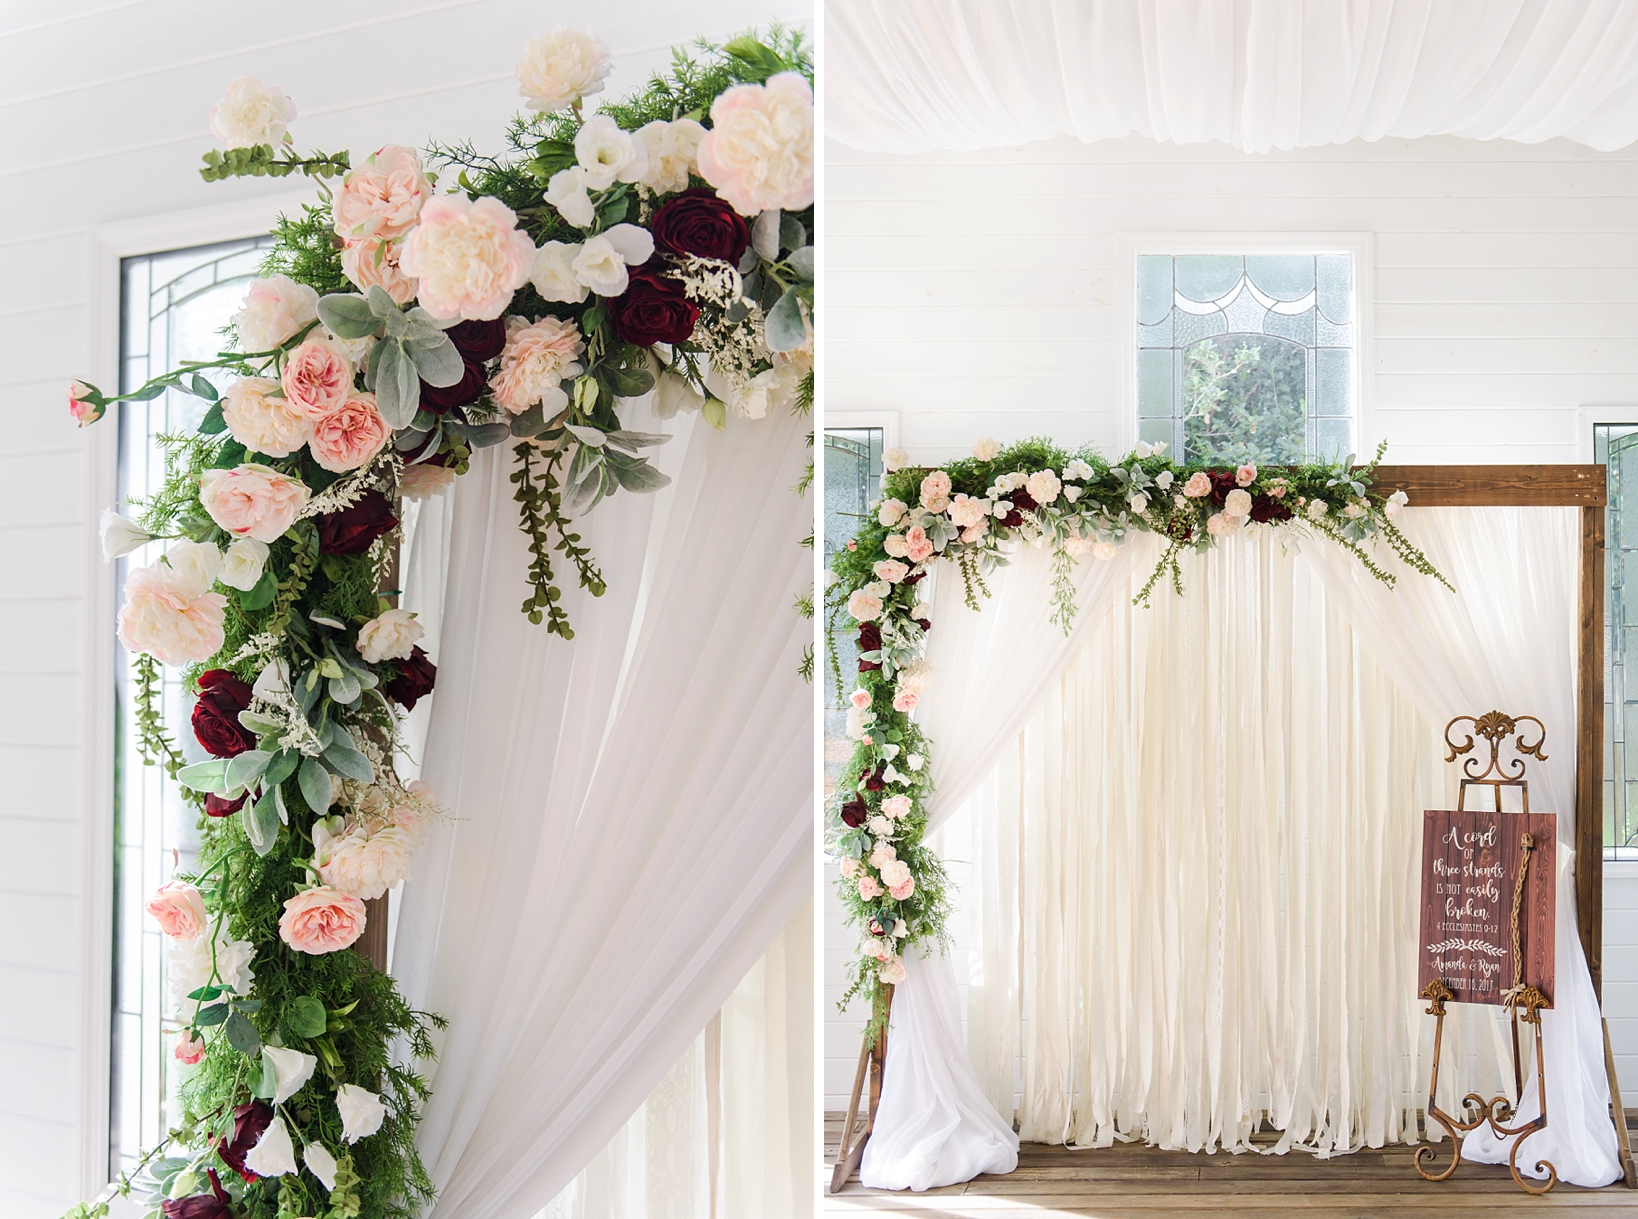 Floral details of the wedding arch by Sarah & Ben Photography